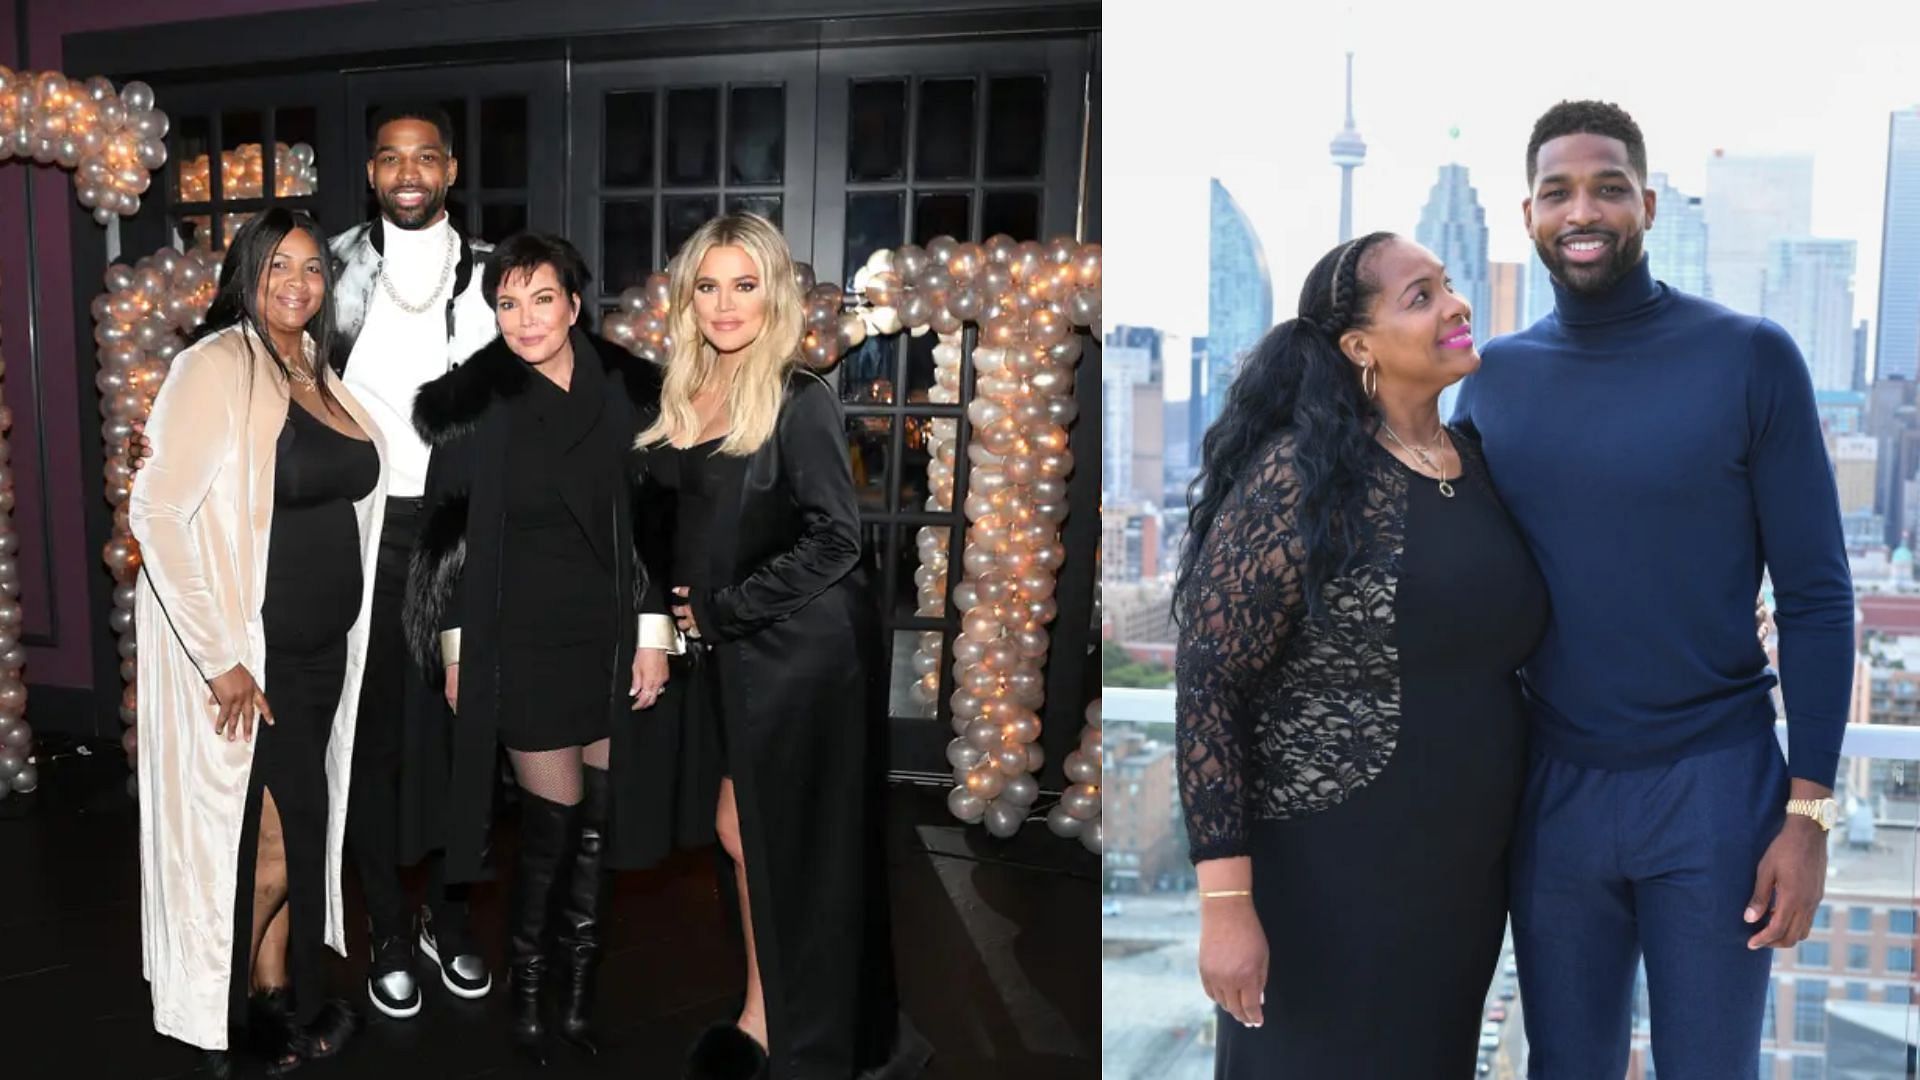 Kris Jenner shares a touching tribute to Tristan Thompson